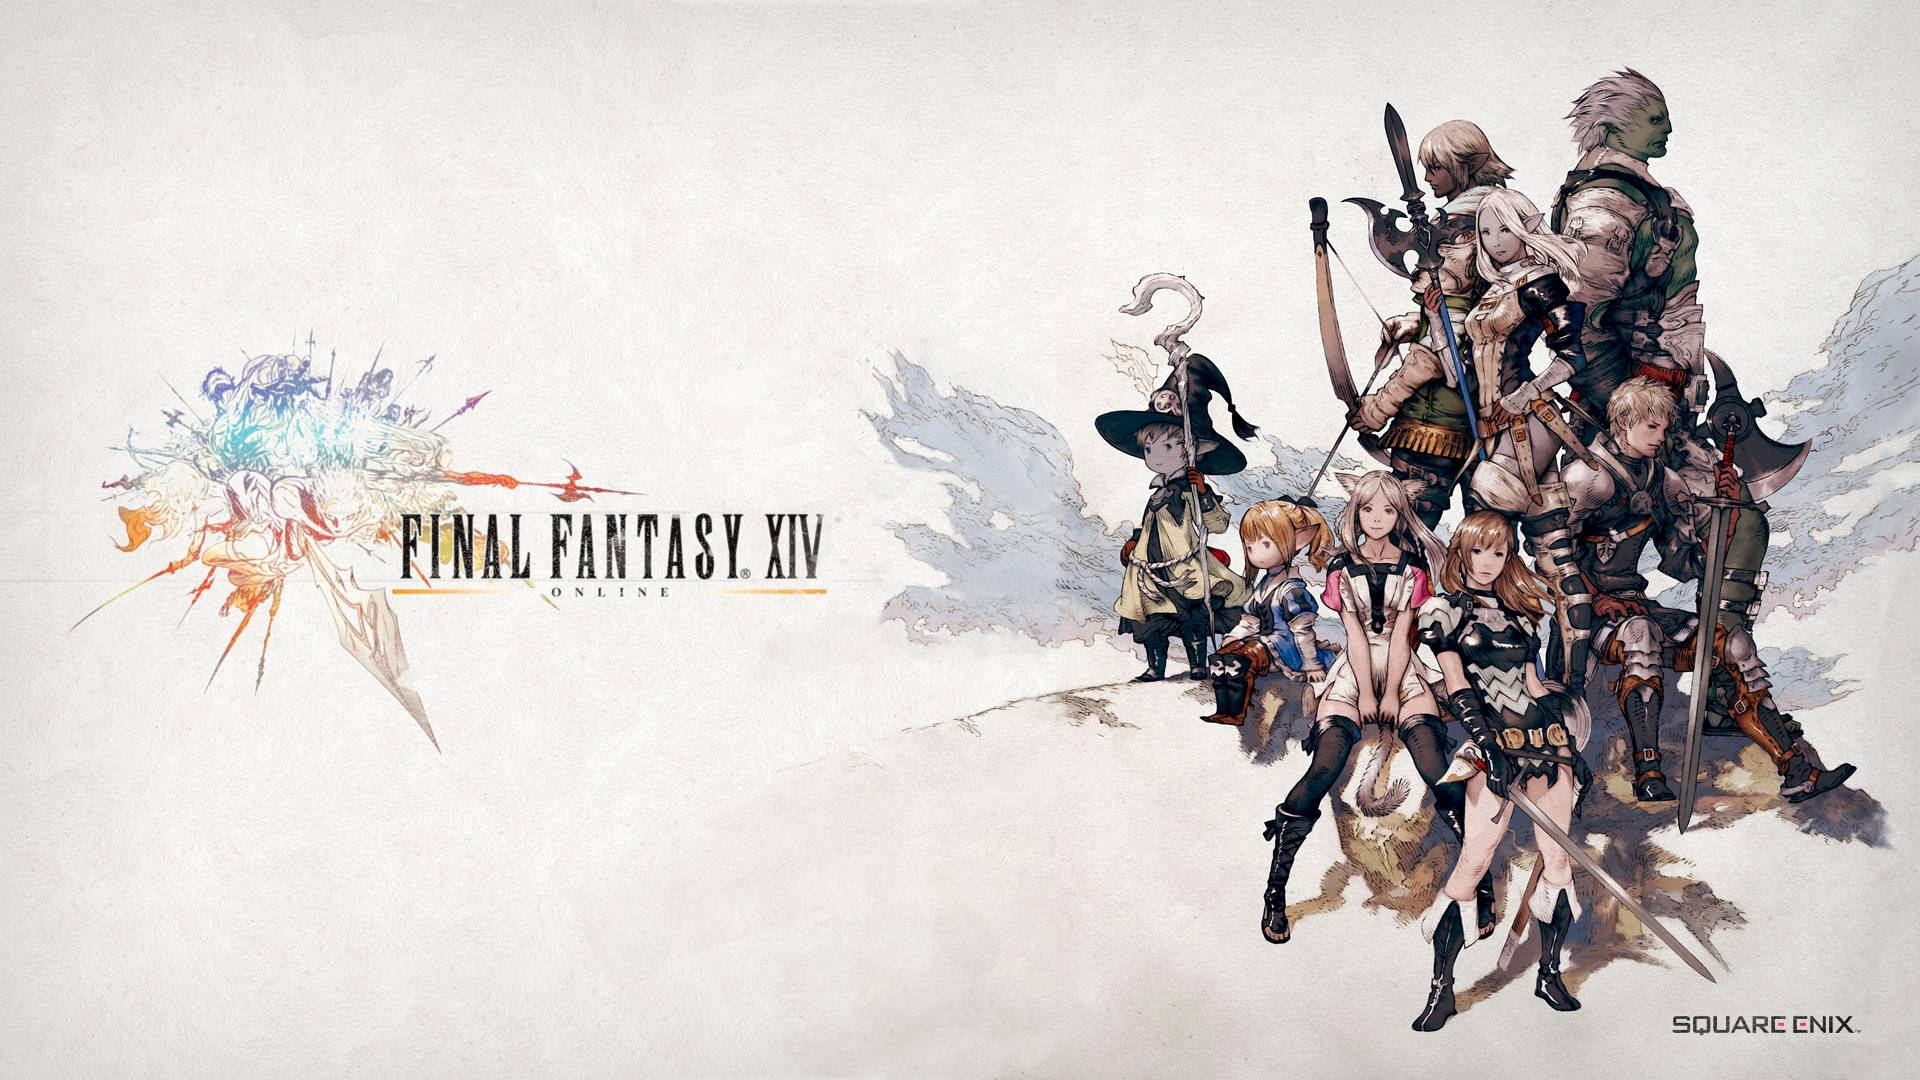 Square Enix Adds New FFXIV Smartphone and Desktop Wallpapers